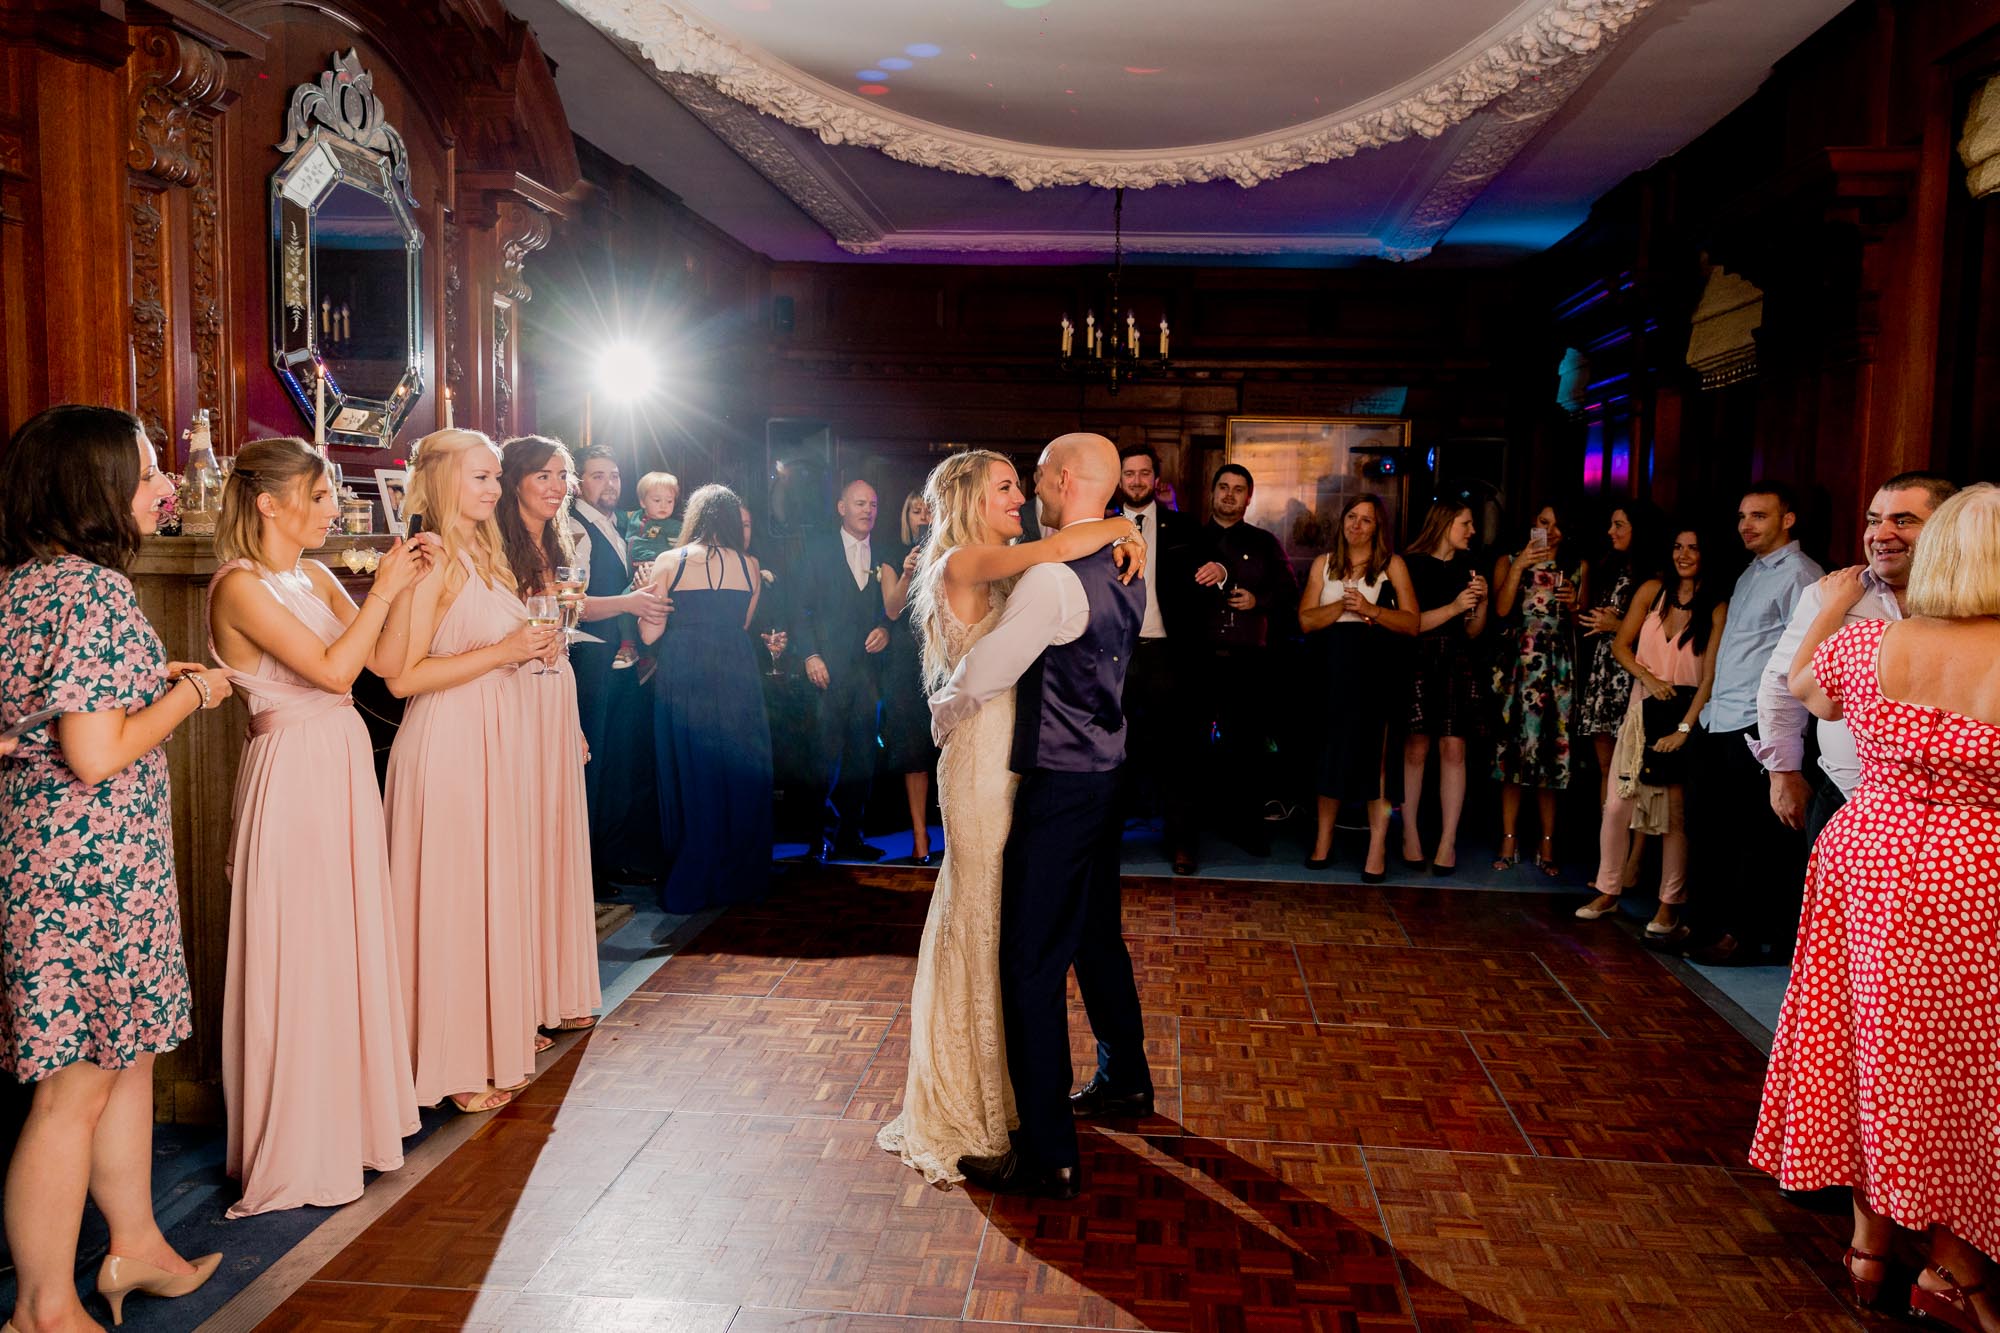 Bride and groom have their first dance together on their wedding day at Barnett Hill in Surrey.